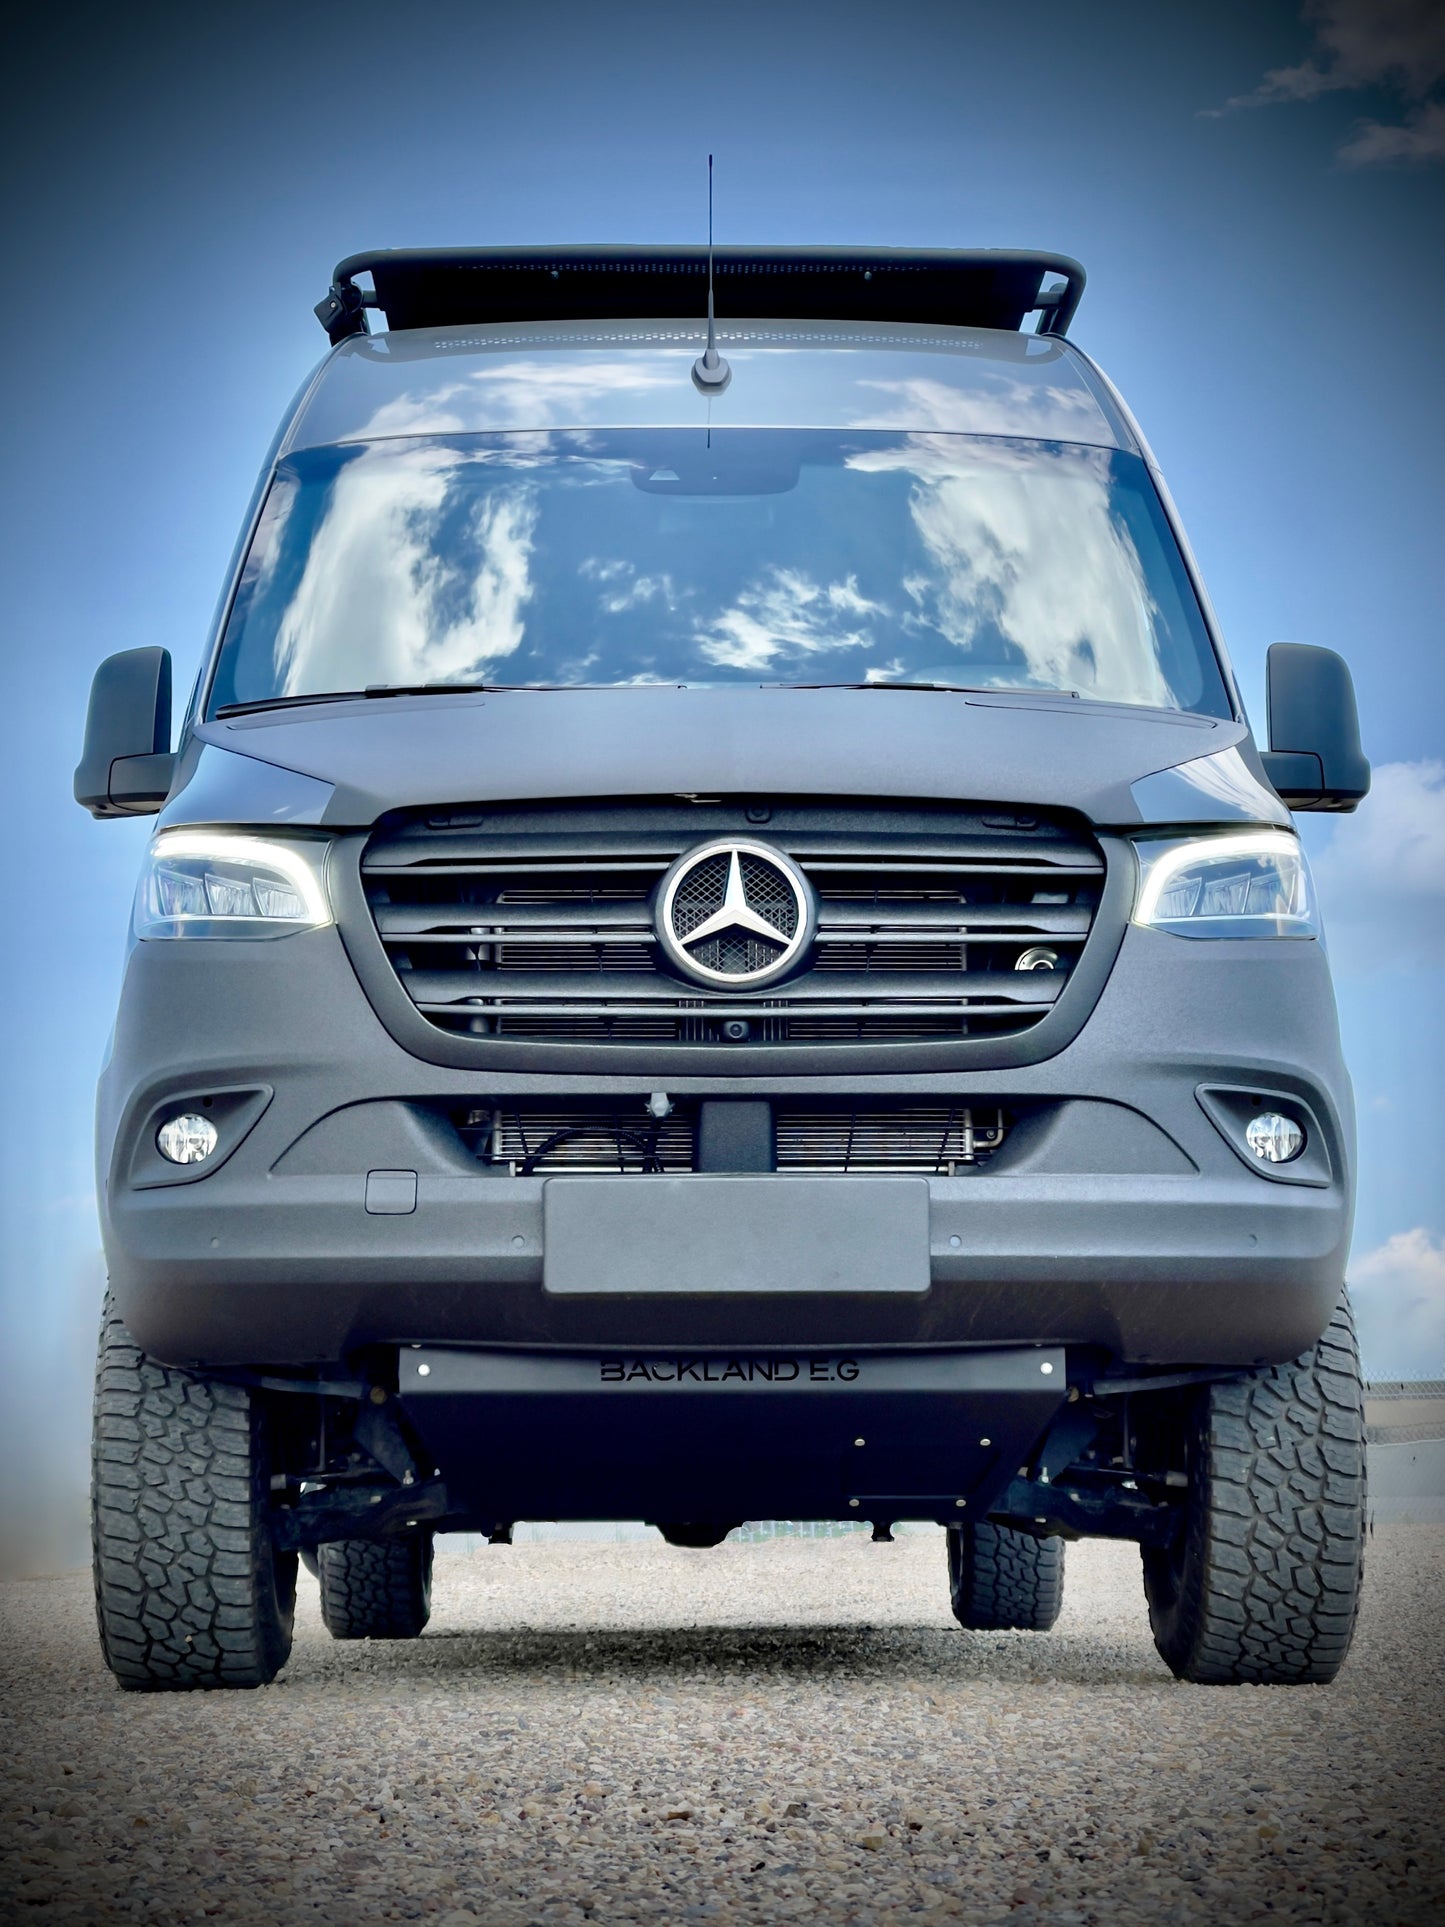 Front view of a Mercedes van with a sprinter skid plate.